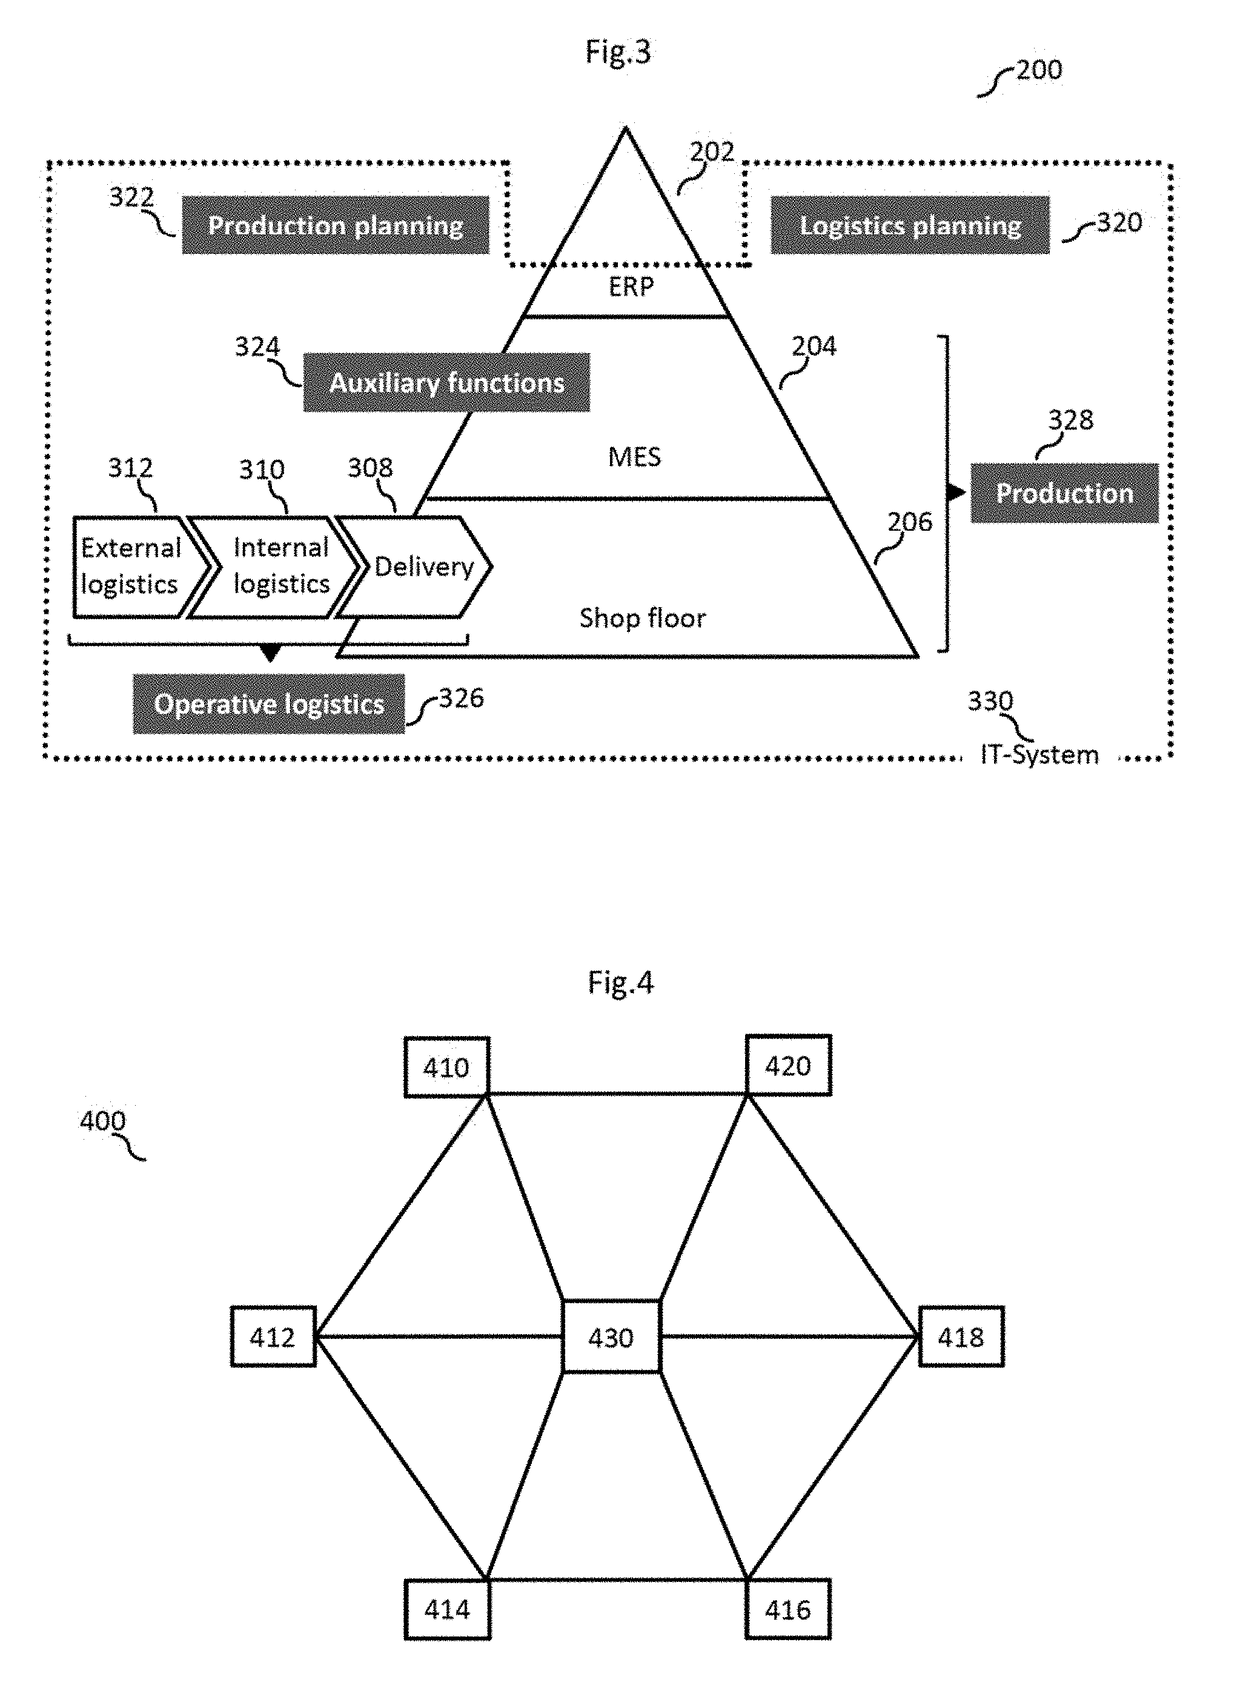 Method for manufacturing a product with integrated planning and direct holistic control